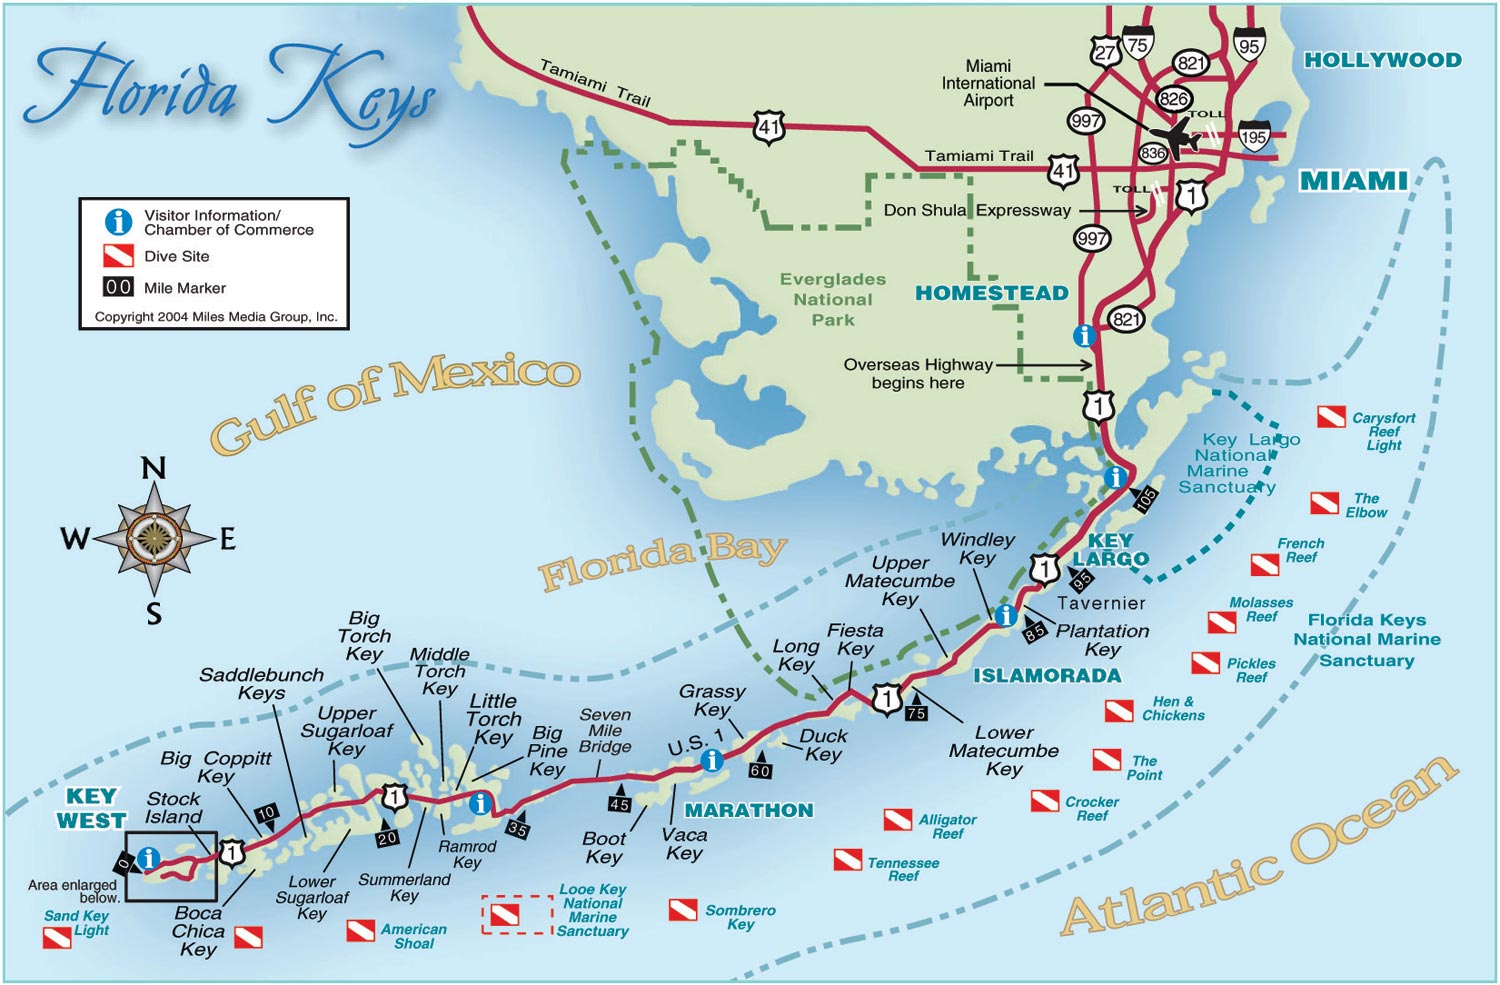 florida keys and key west real estate and tourist information